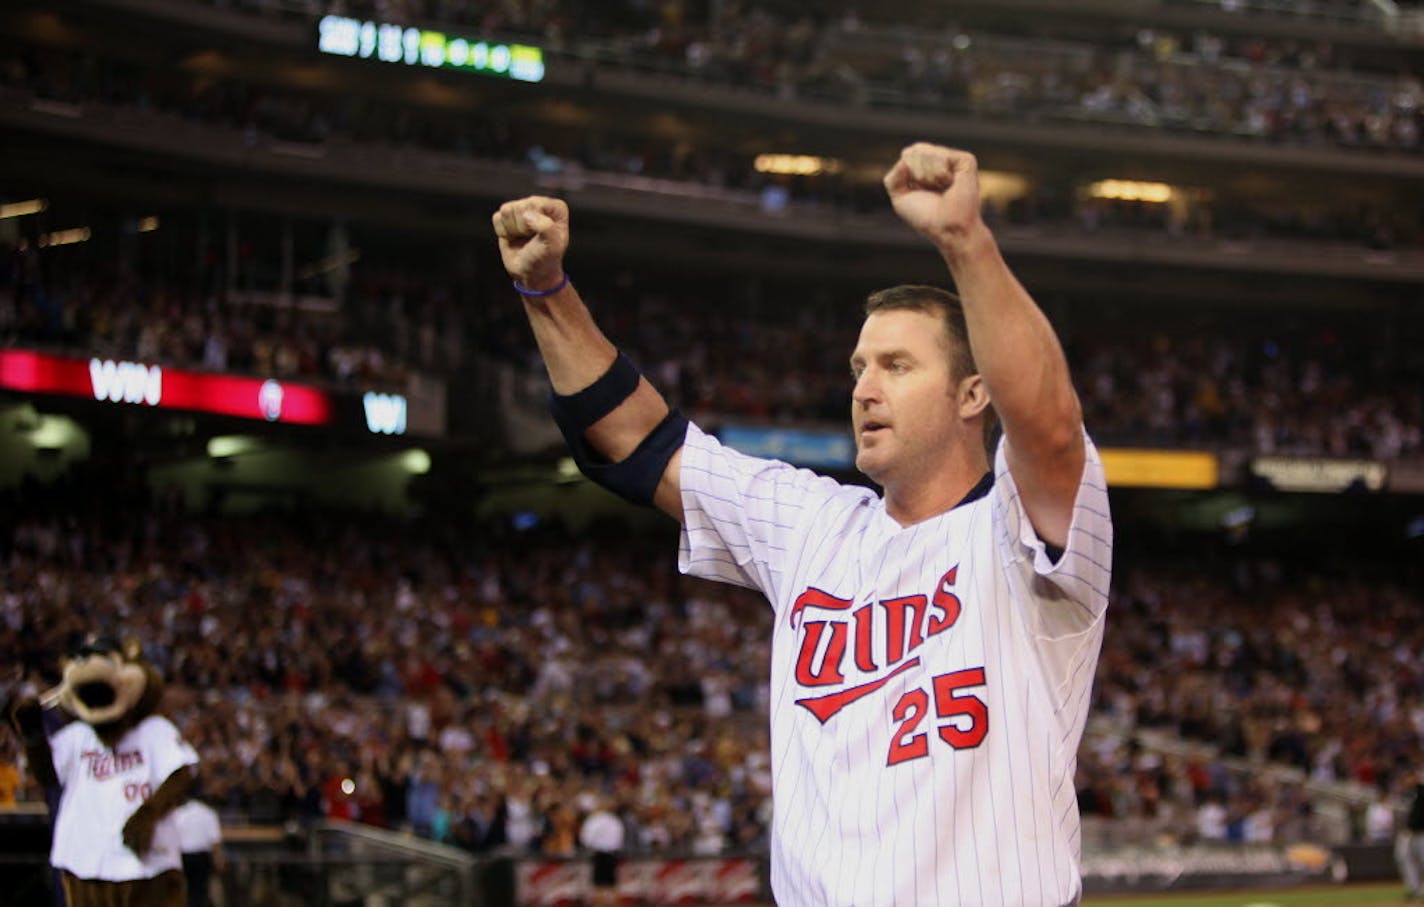 Jim Thome saluted the Target Field crowd after a 10th inning home run that beat the White Sox in 2010.